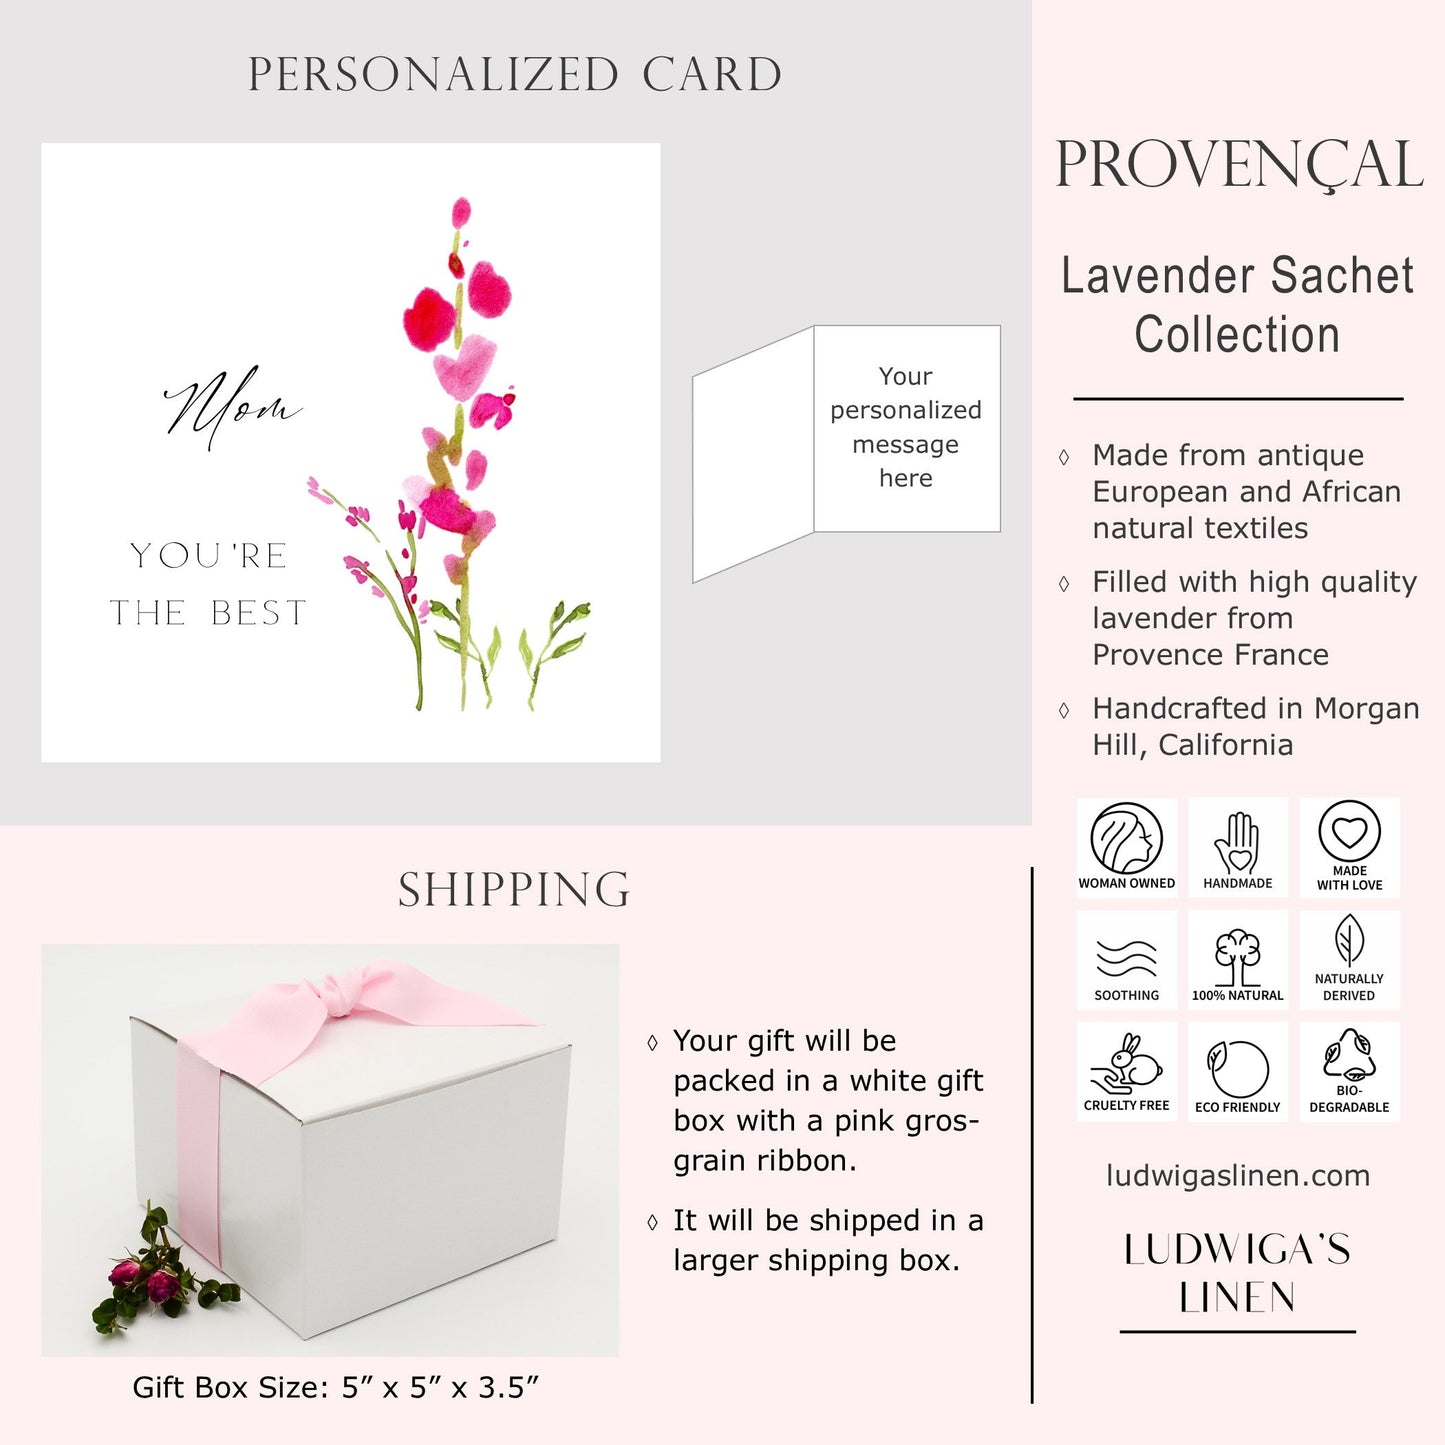 Gift Box with hot pink gros grain ribbon, personalized card, shipping and general information about Ludwiga's Linen Provençal sachet collection